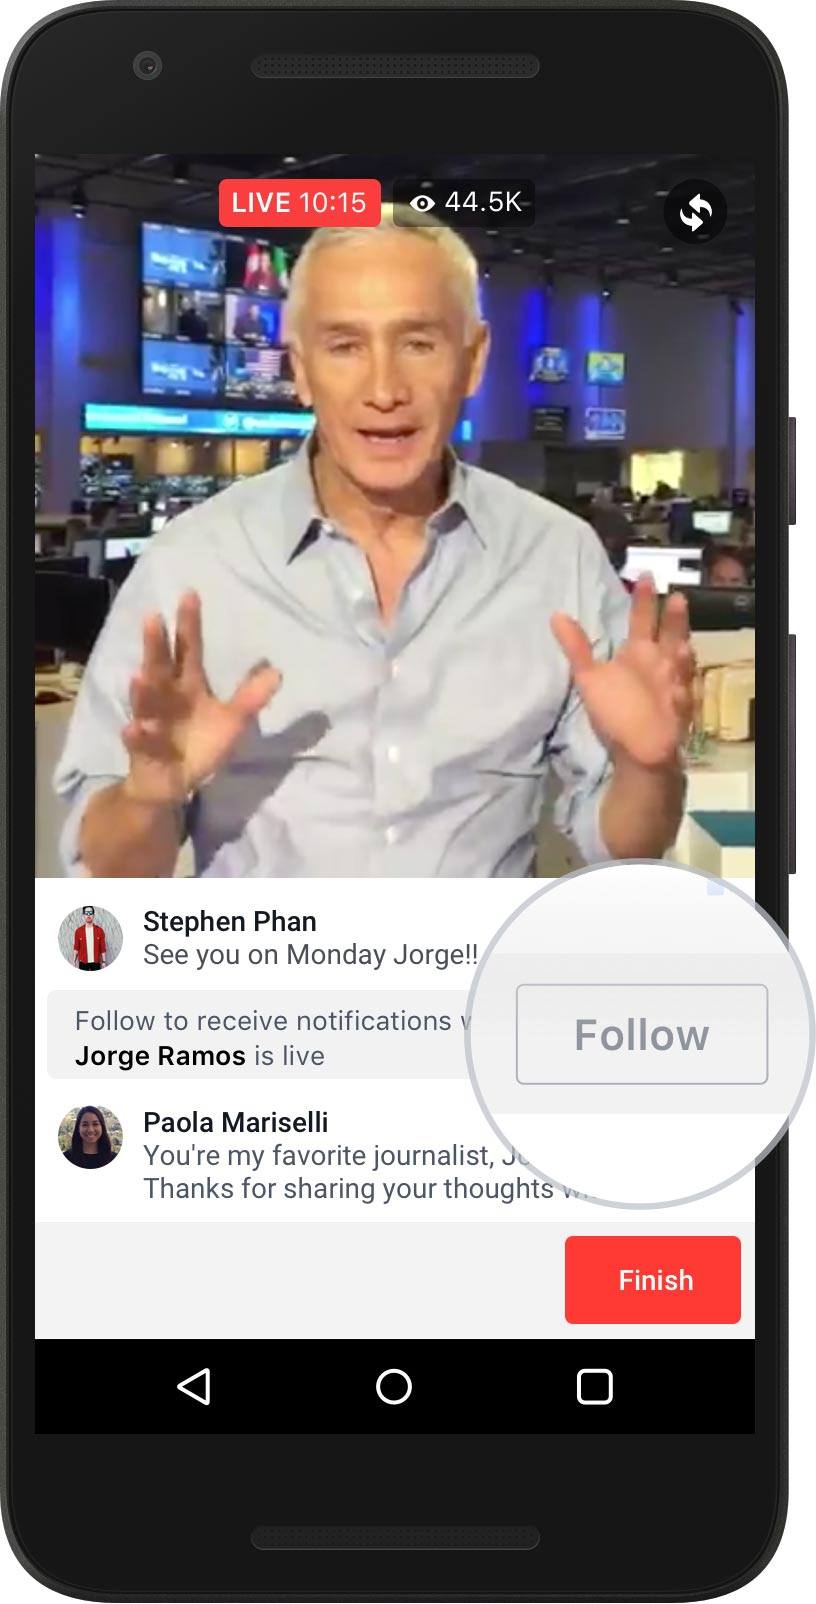  ‘Follow’ button on live video so users can receive notifications when you’re next live